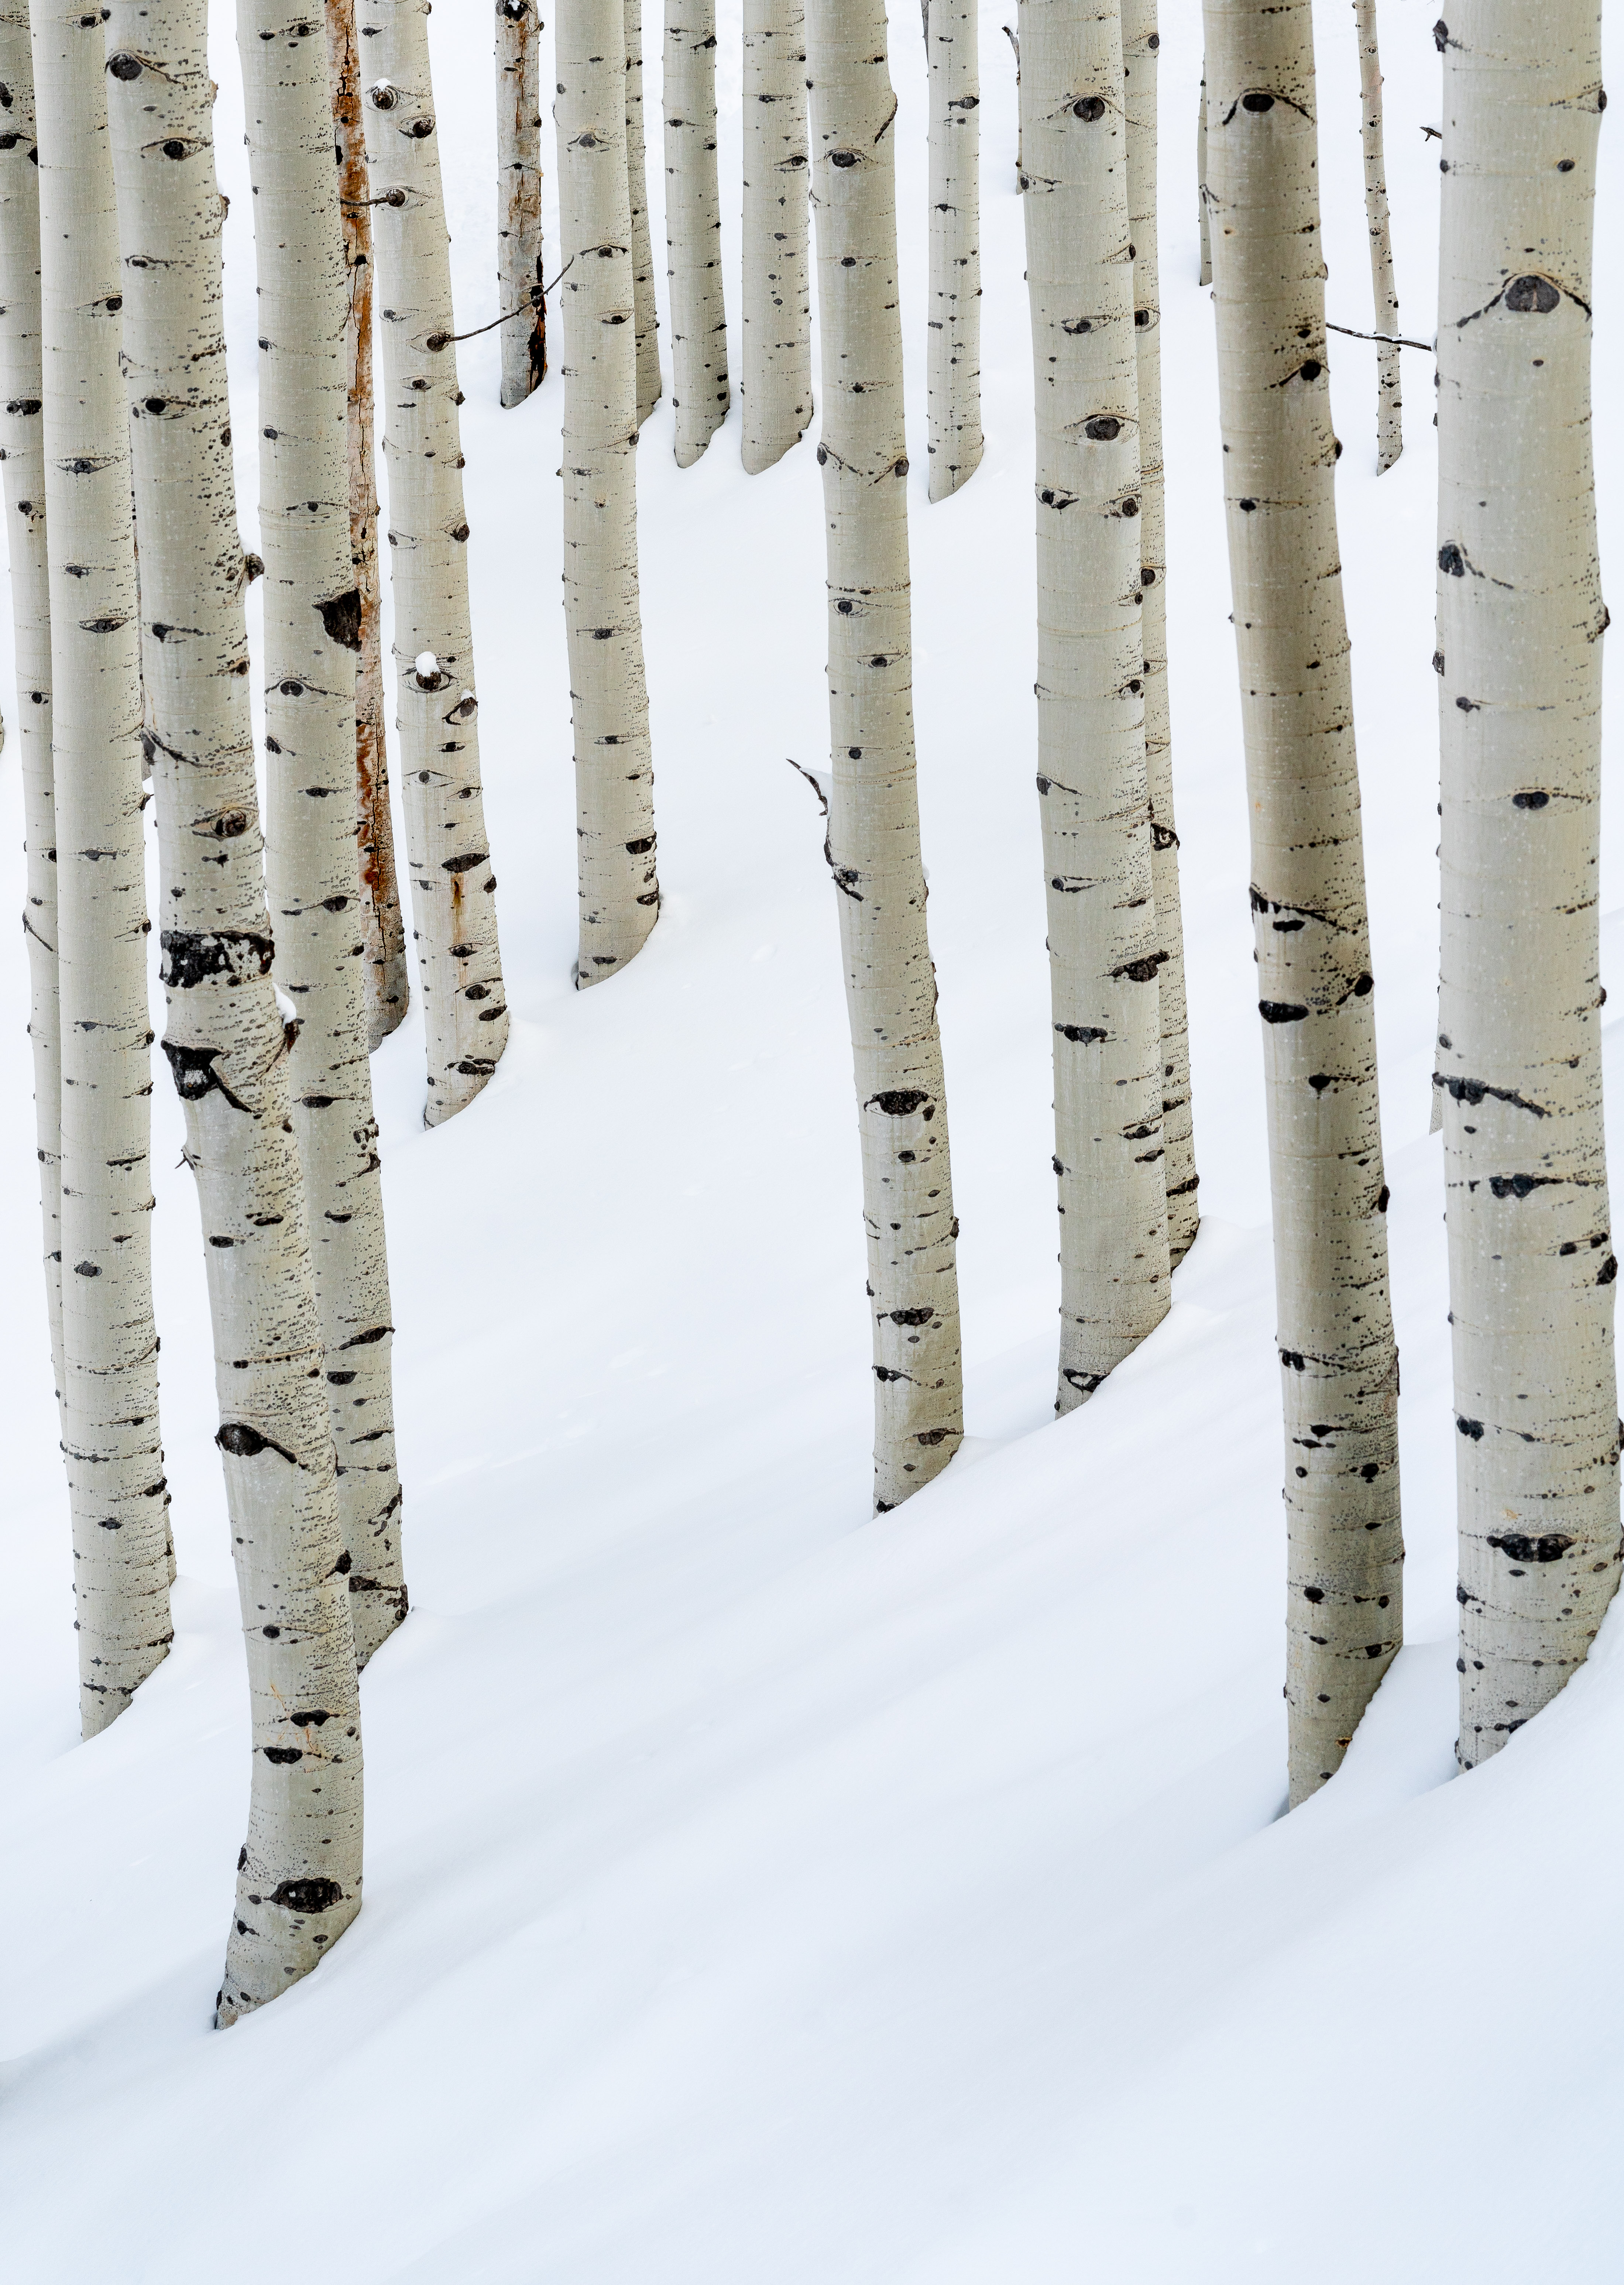 Aspen Trees in snow, Wasatch Mountains, Utah | 